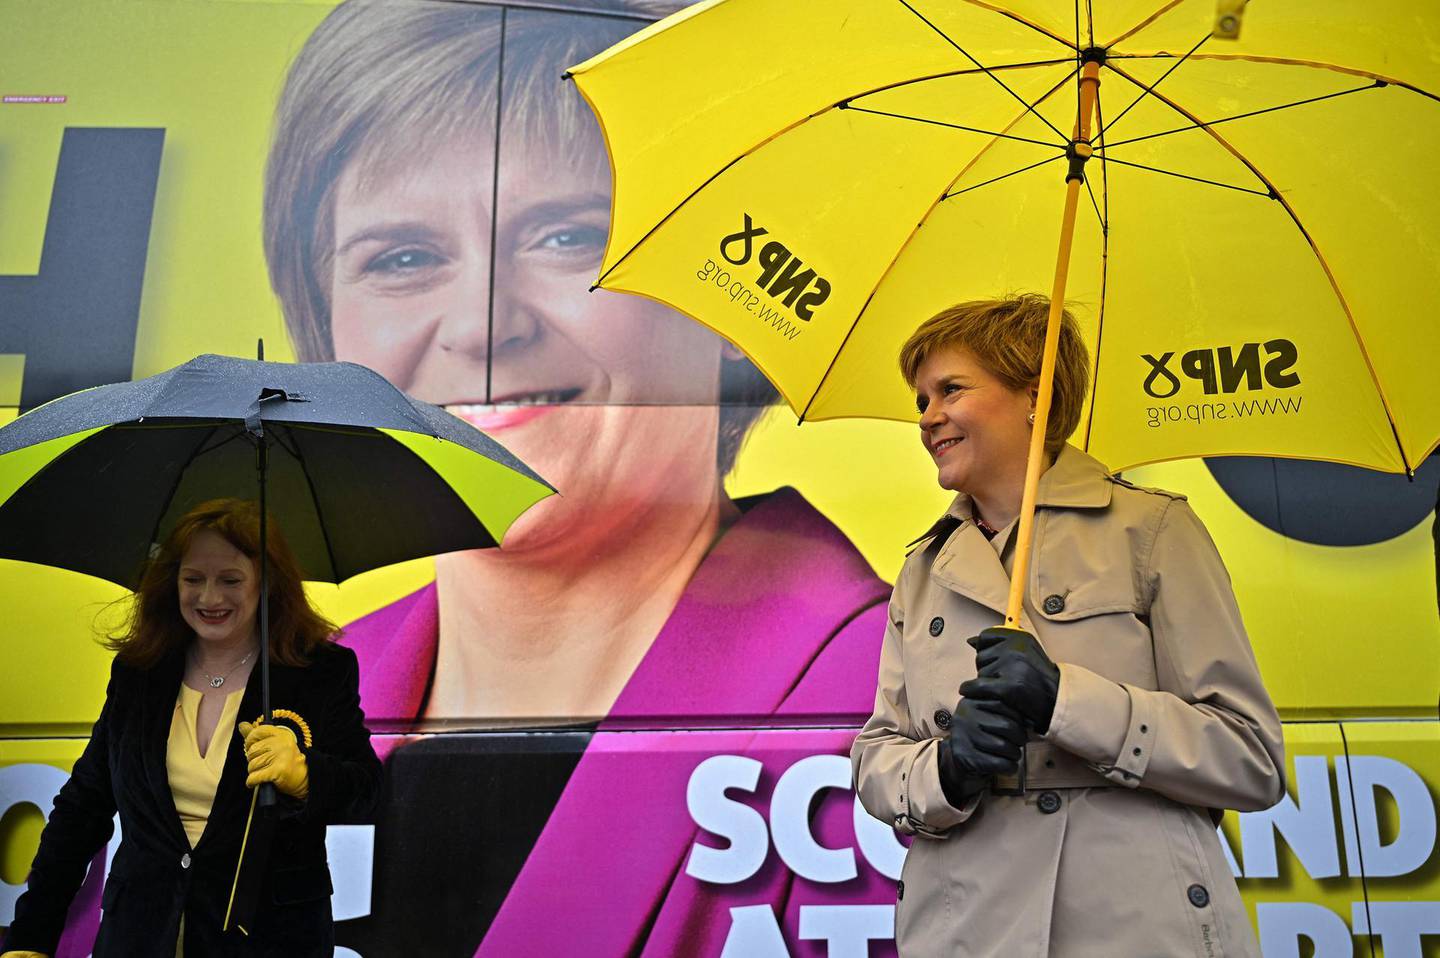 Scotland's First Minister and leader of the Scottish National Party (SNP), Nicola Sturgeon (R) and Joan McAlpine campaign in Midsteeple Quarter in Dumfries, Scotland on May 3, 2021, ahead of the upcoming Scottish Parliament election which is to be held on May 6, 2021.   / AFP / POOL / Jeff J Mitchell
